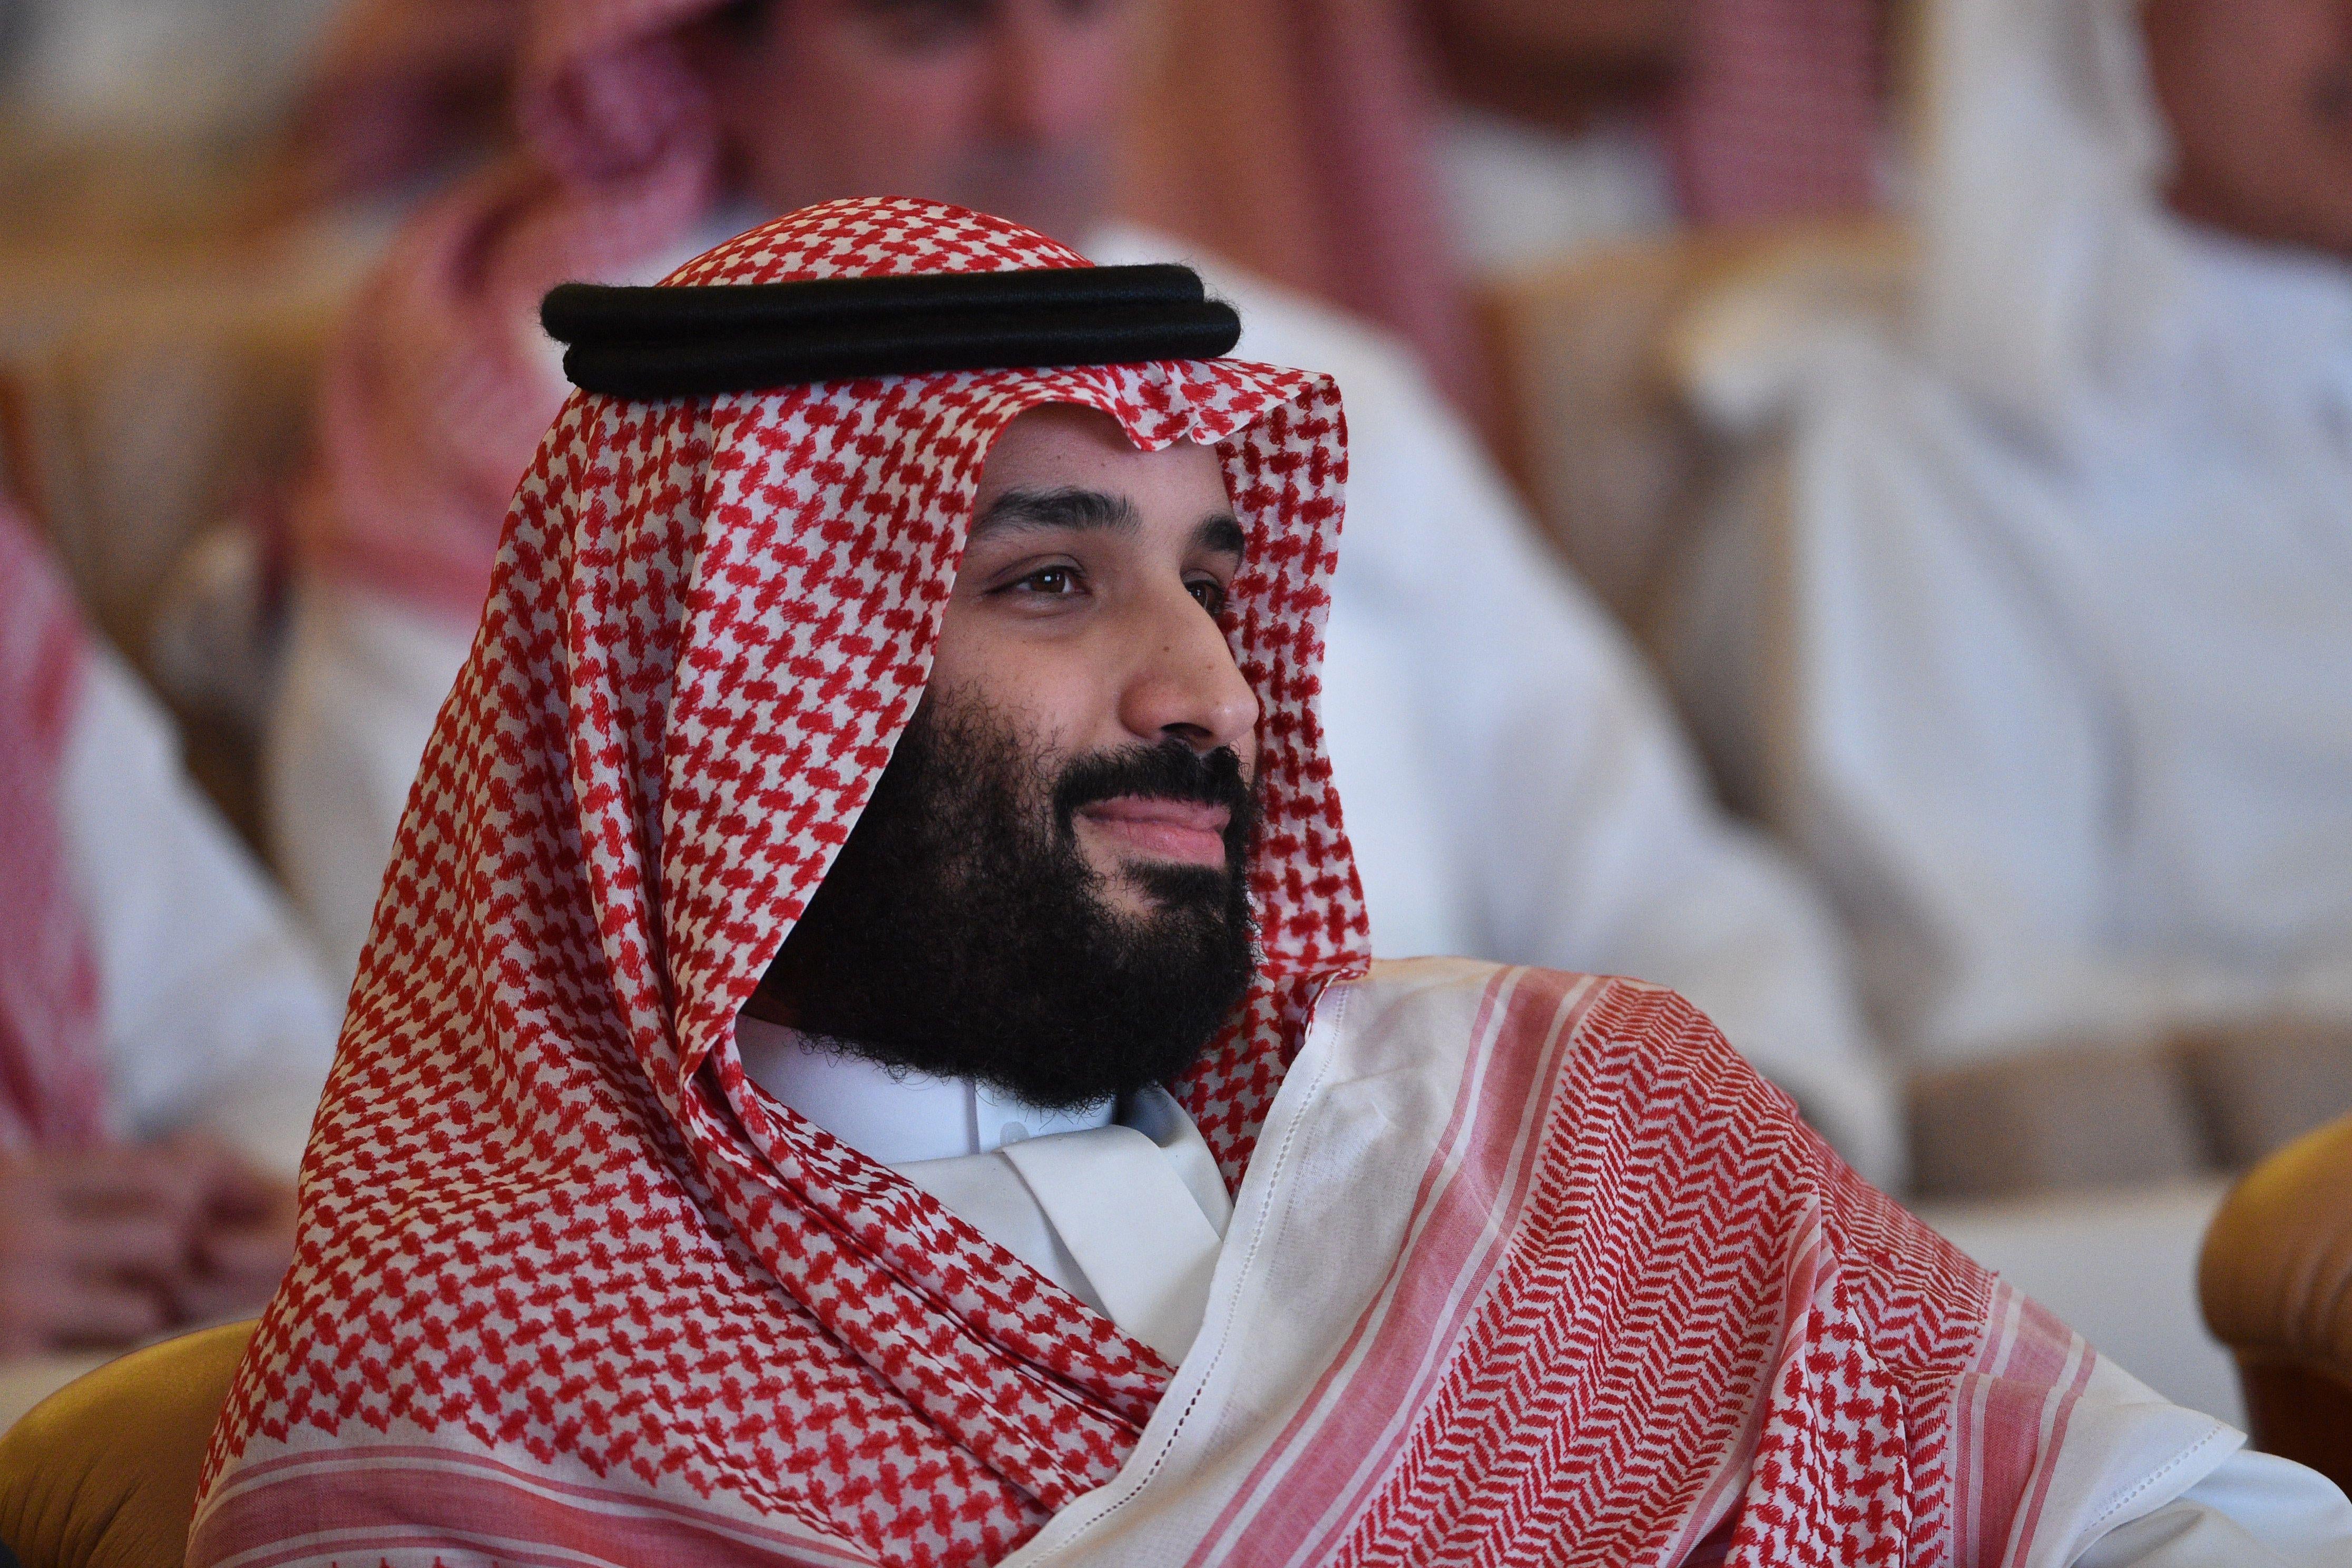 Saudi Crown Prince Mohammed bin Salman attends the Future Investment Initiative (FII) conference in the Saudi capital Riyadh on October 23, 2018. - Saudi Arabia is hosting the key investment summit overshadowed by the killing of critic Jamal Khashoggi that has prompted a wave of policymakers and corporate giants to withdraw. (Photo by Fayez Nureldine / AFP)        (Photo credit should read FAYEZ NURELDINE/AFP/Getty Images)